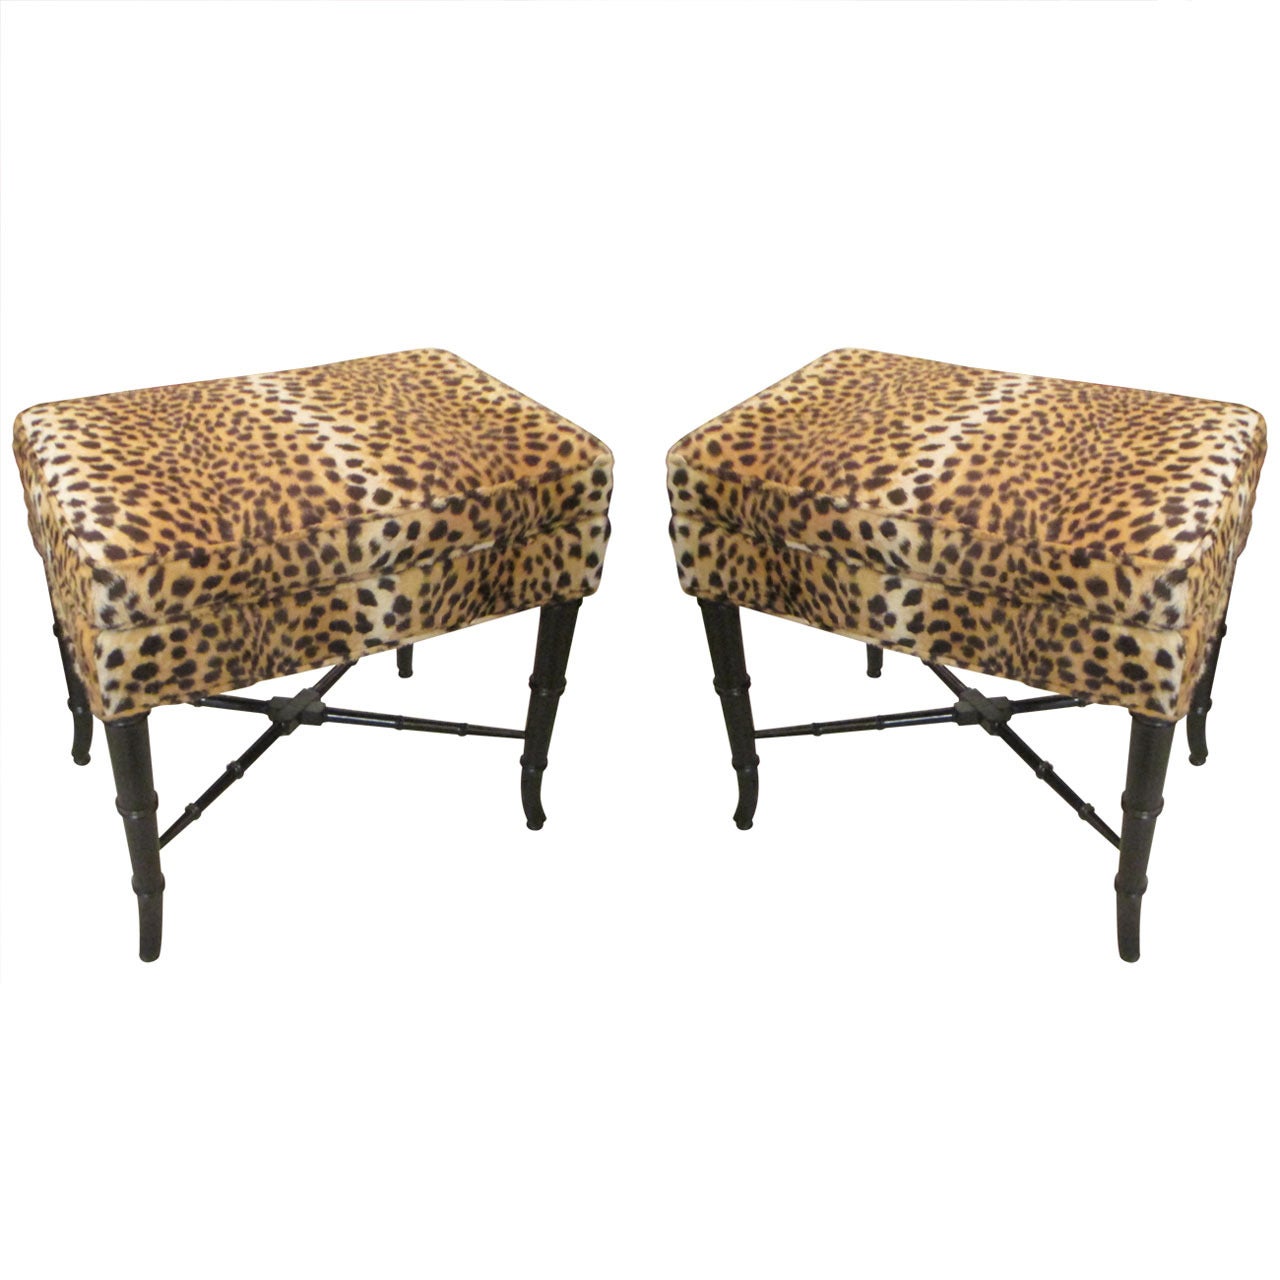 A Pair of Faux Bamboo Benches Upholstered in Leopard Print